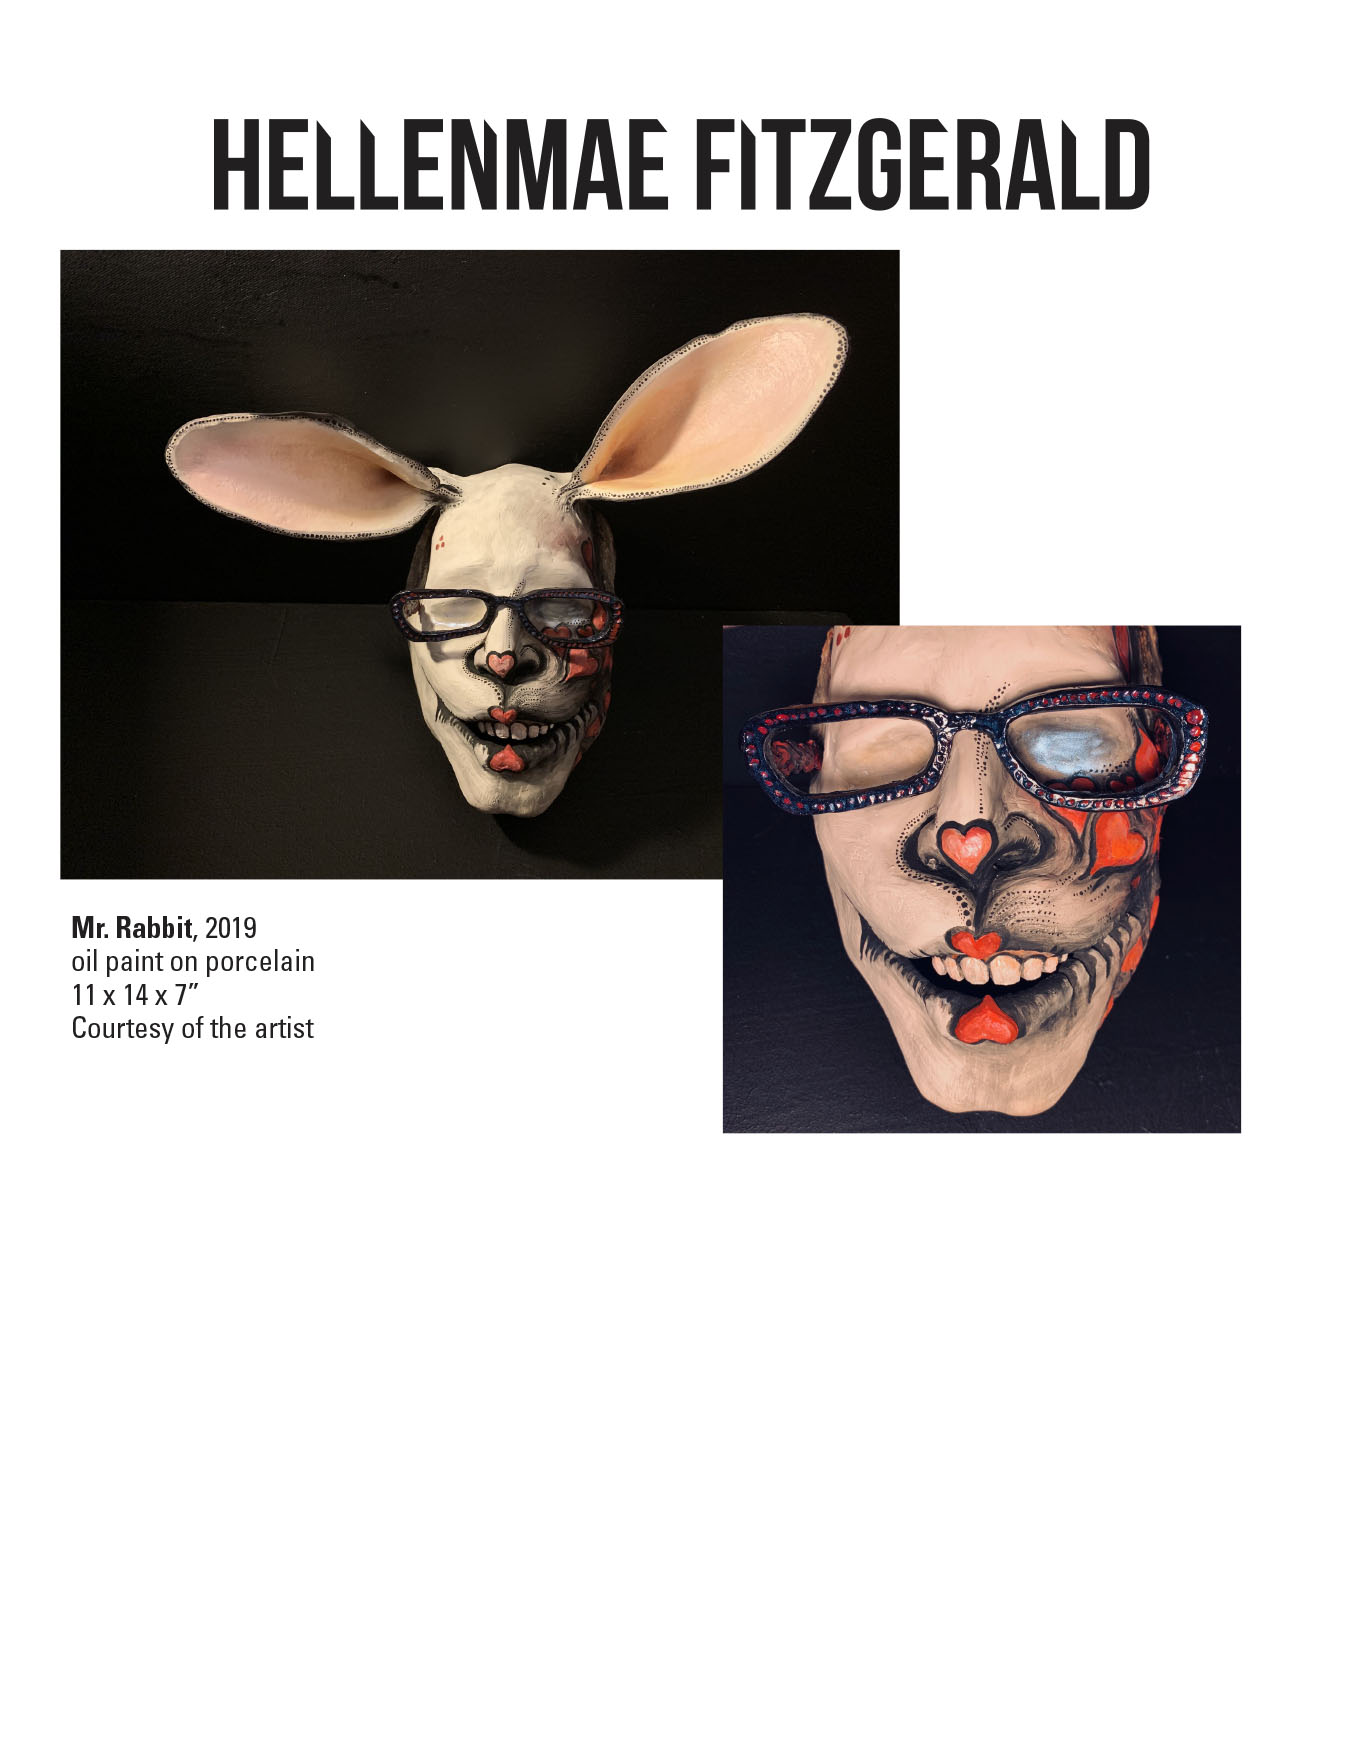 Hellenmae Fitzgerald, Mr. Rabbit, 2019. Oil paint on porcelain. 11 x 14 x 7” Courtesy of the artist. A sculpture of a human head with the ears of a rabbit and hearts painted onto the face